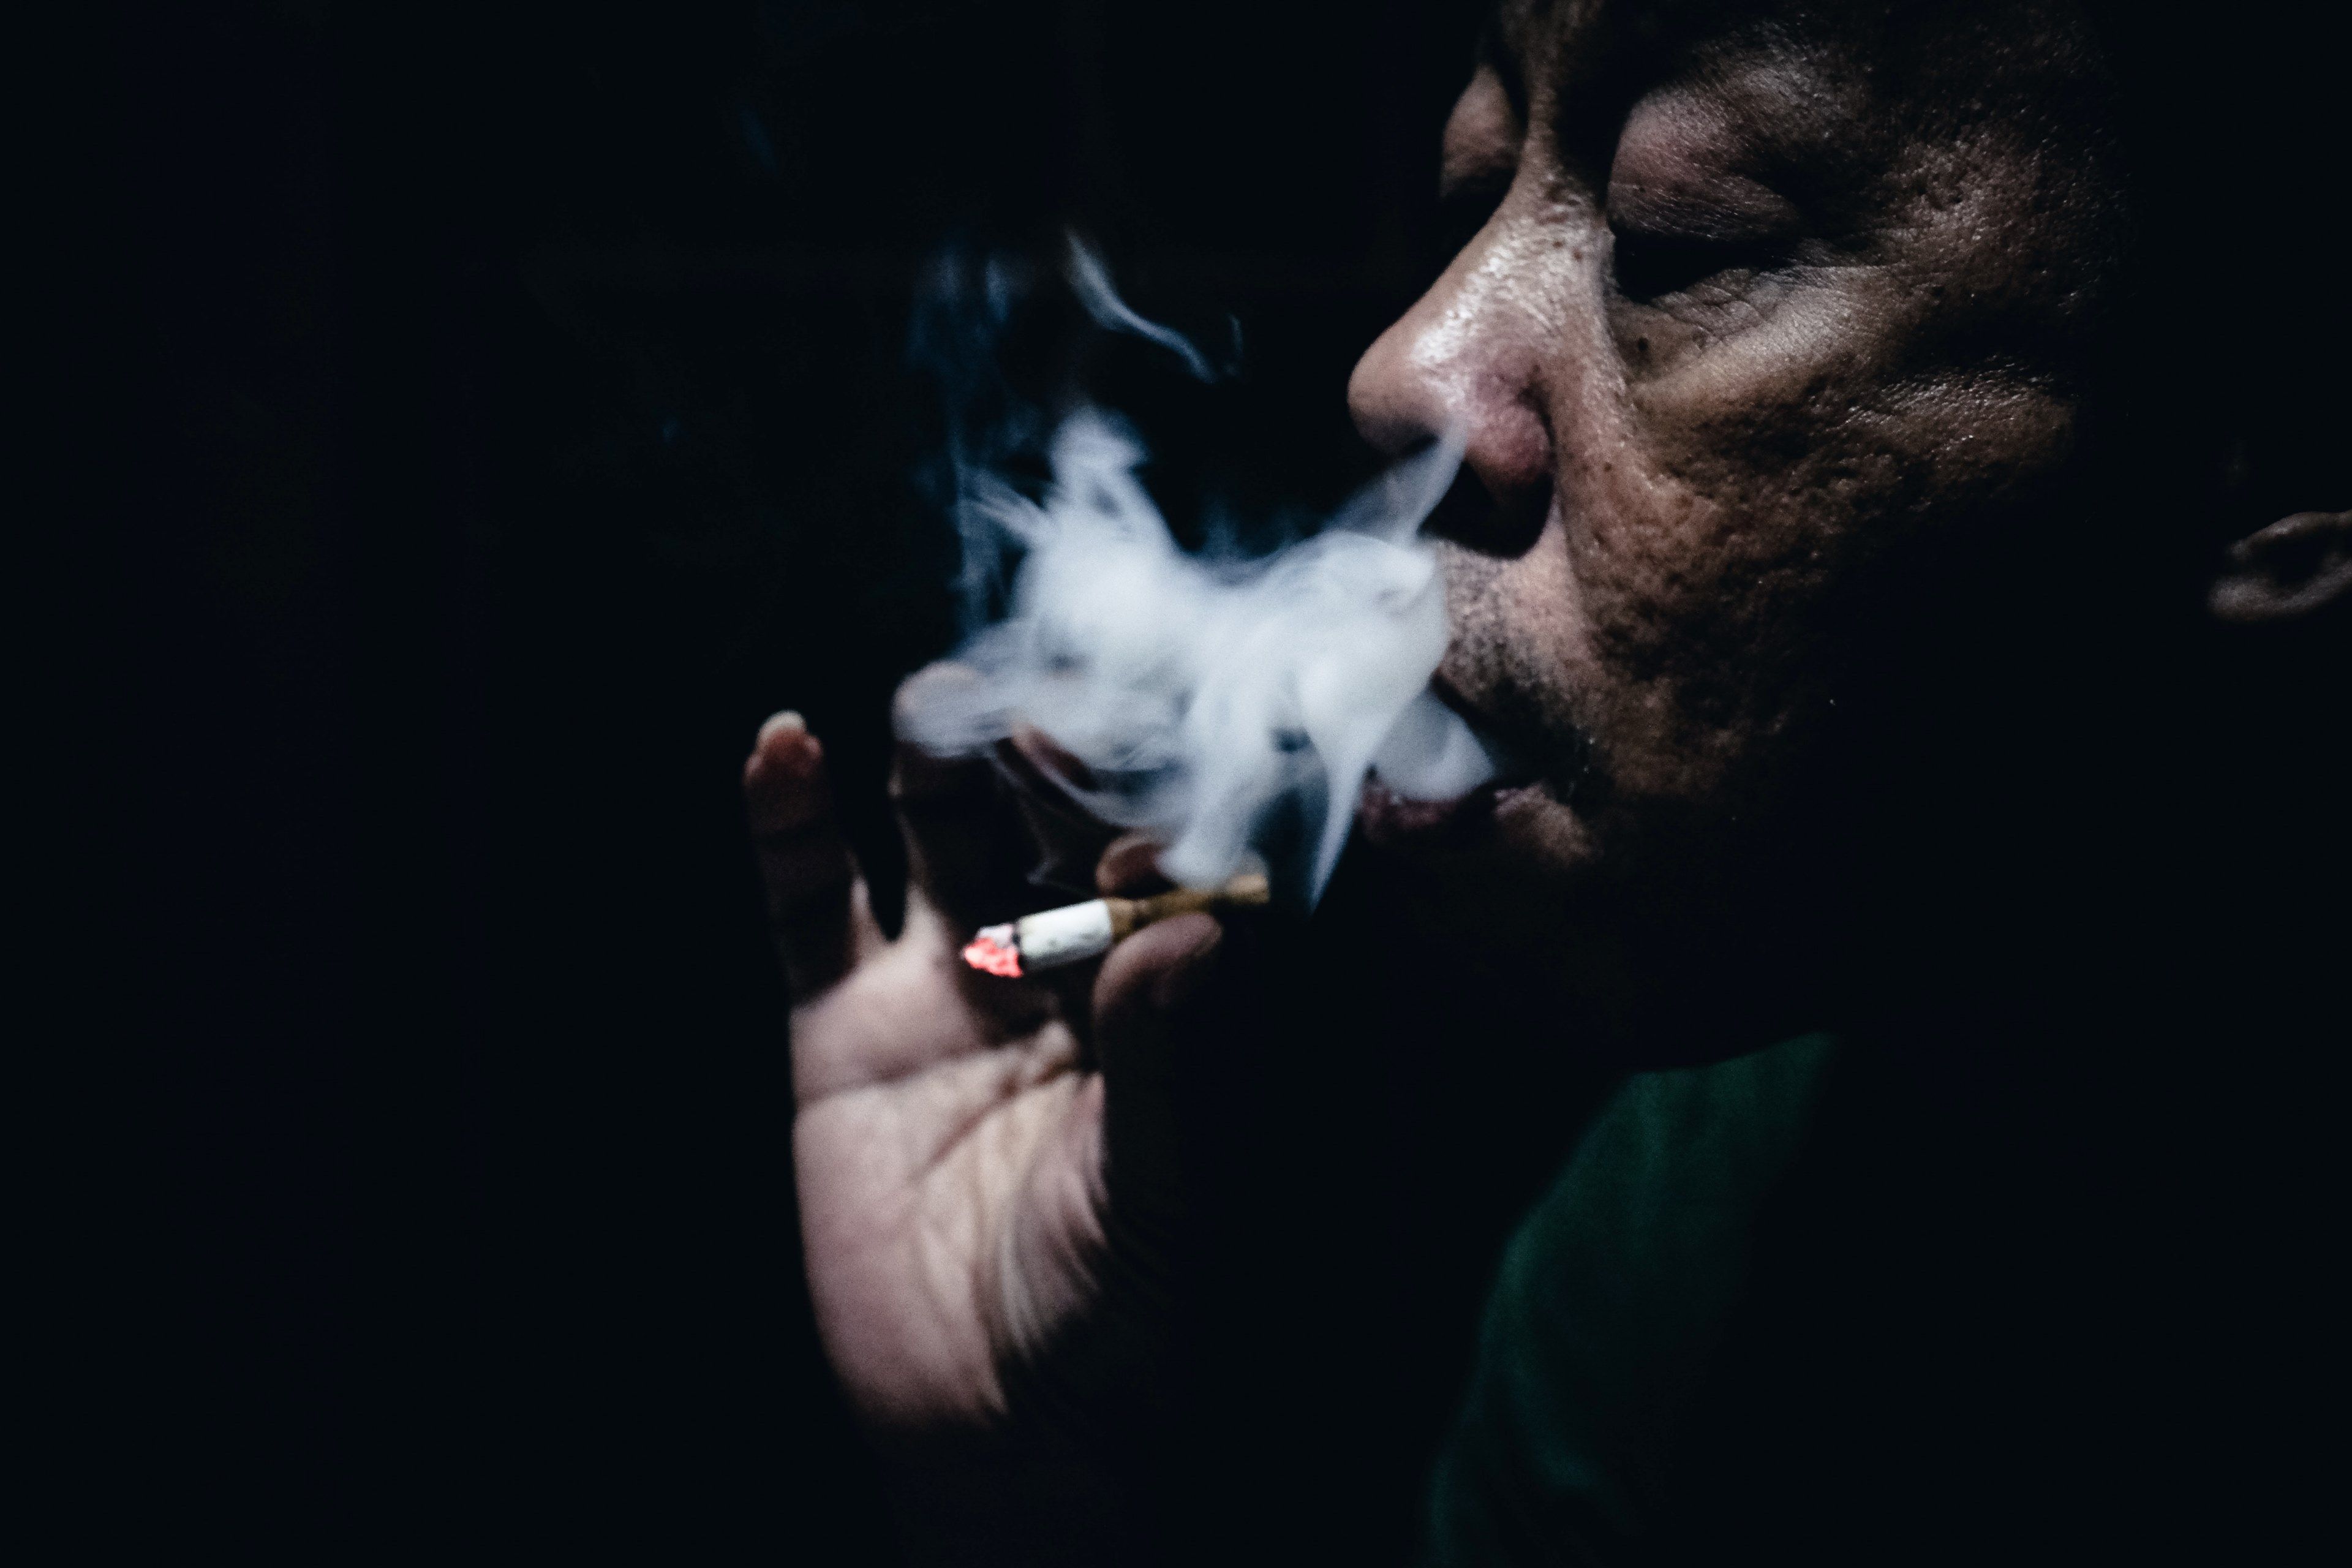 Wallpaper / dark skinned old man smoking a cigarette in the dark, i smoke therefore i am_ 4k wallpaper